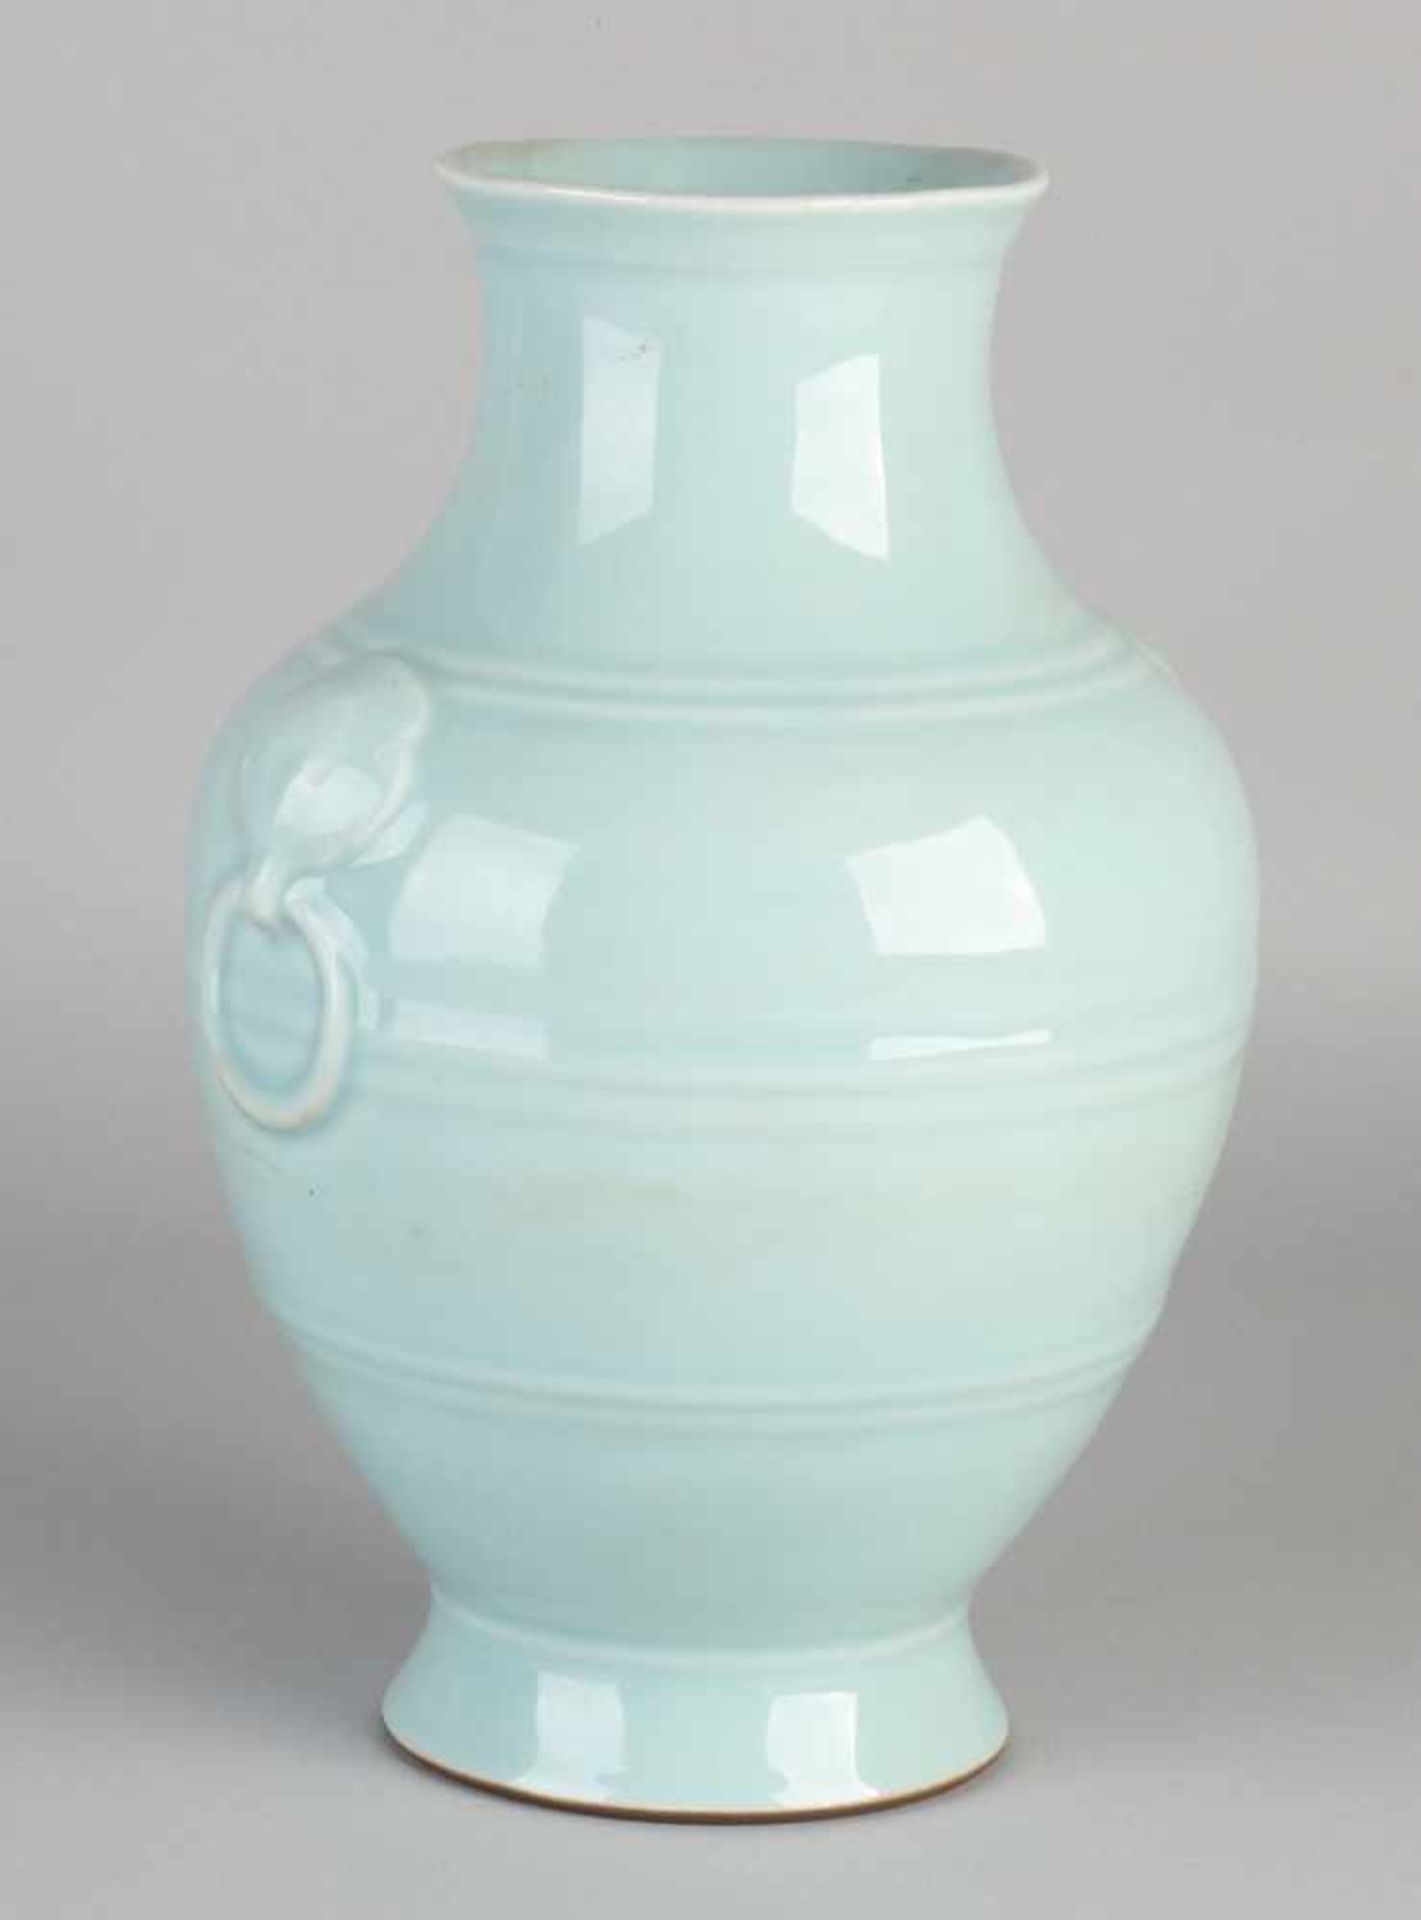 Light blue glazed Chinese porcelain vase with bottom mark and reprocessed rings. Dimensions: H 26